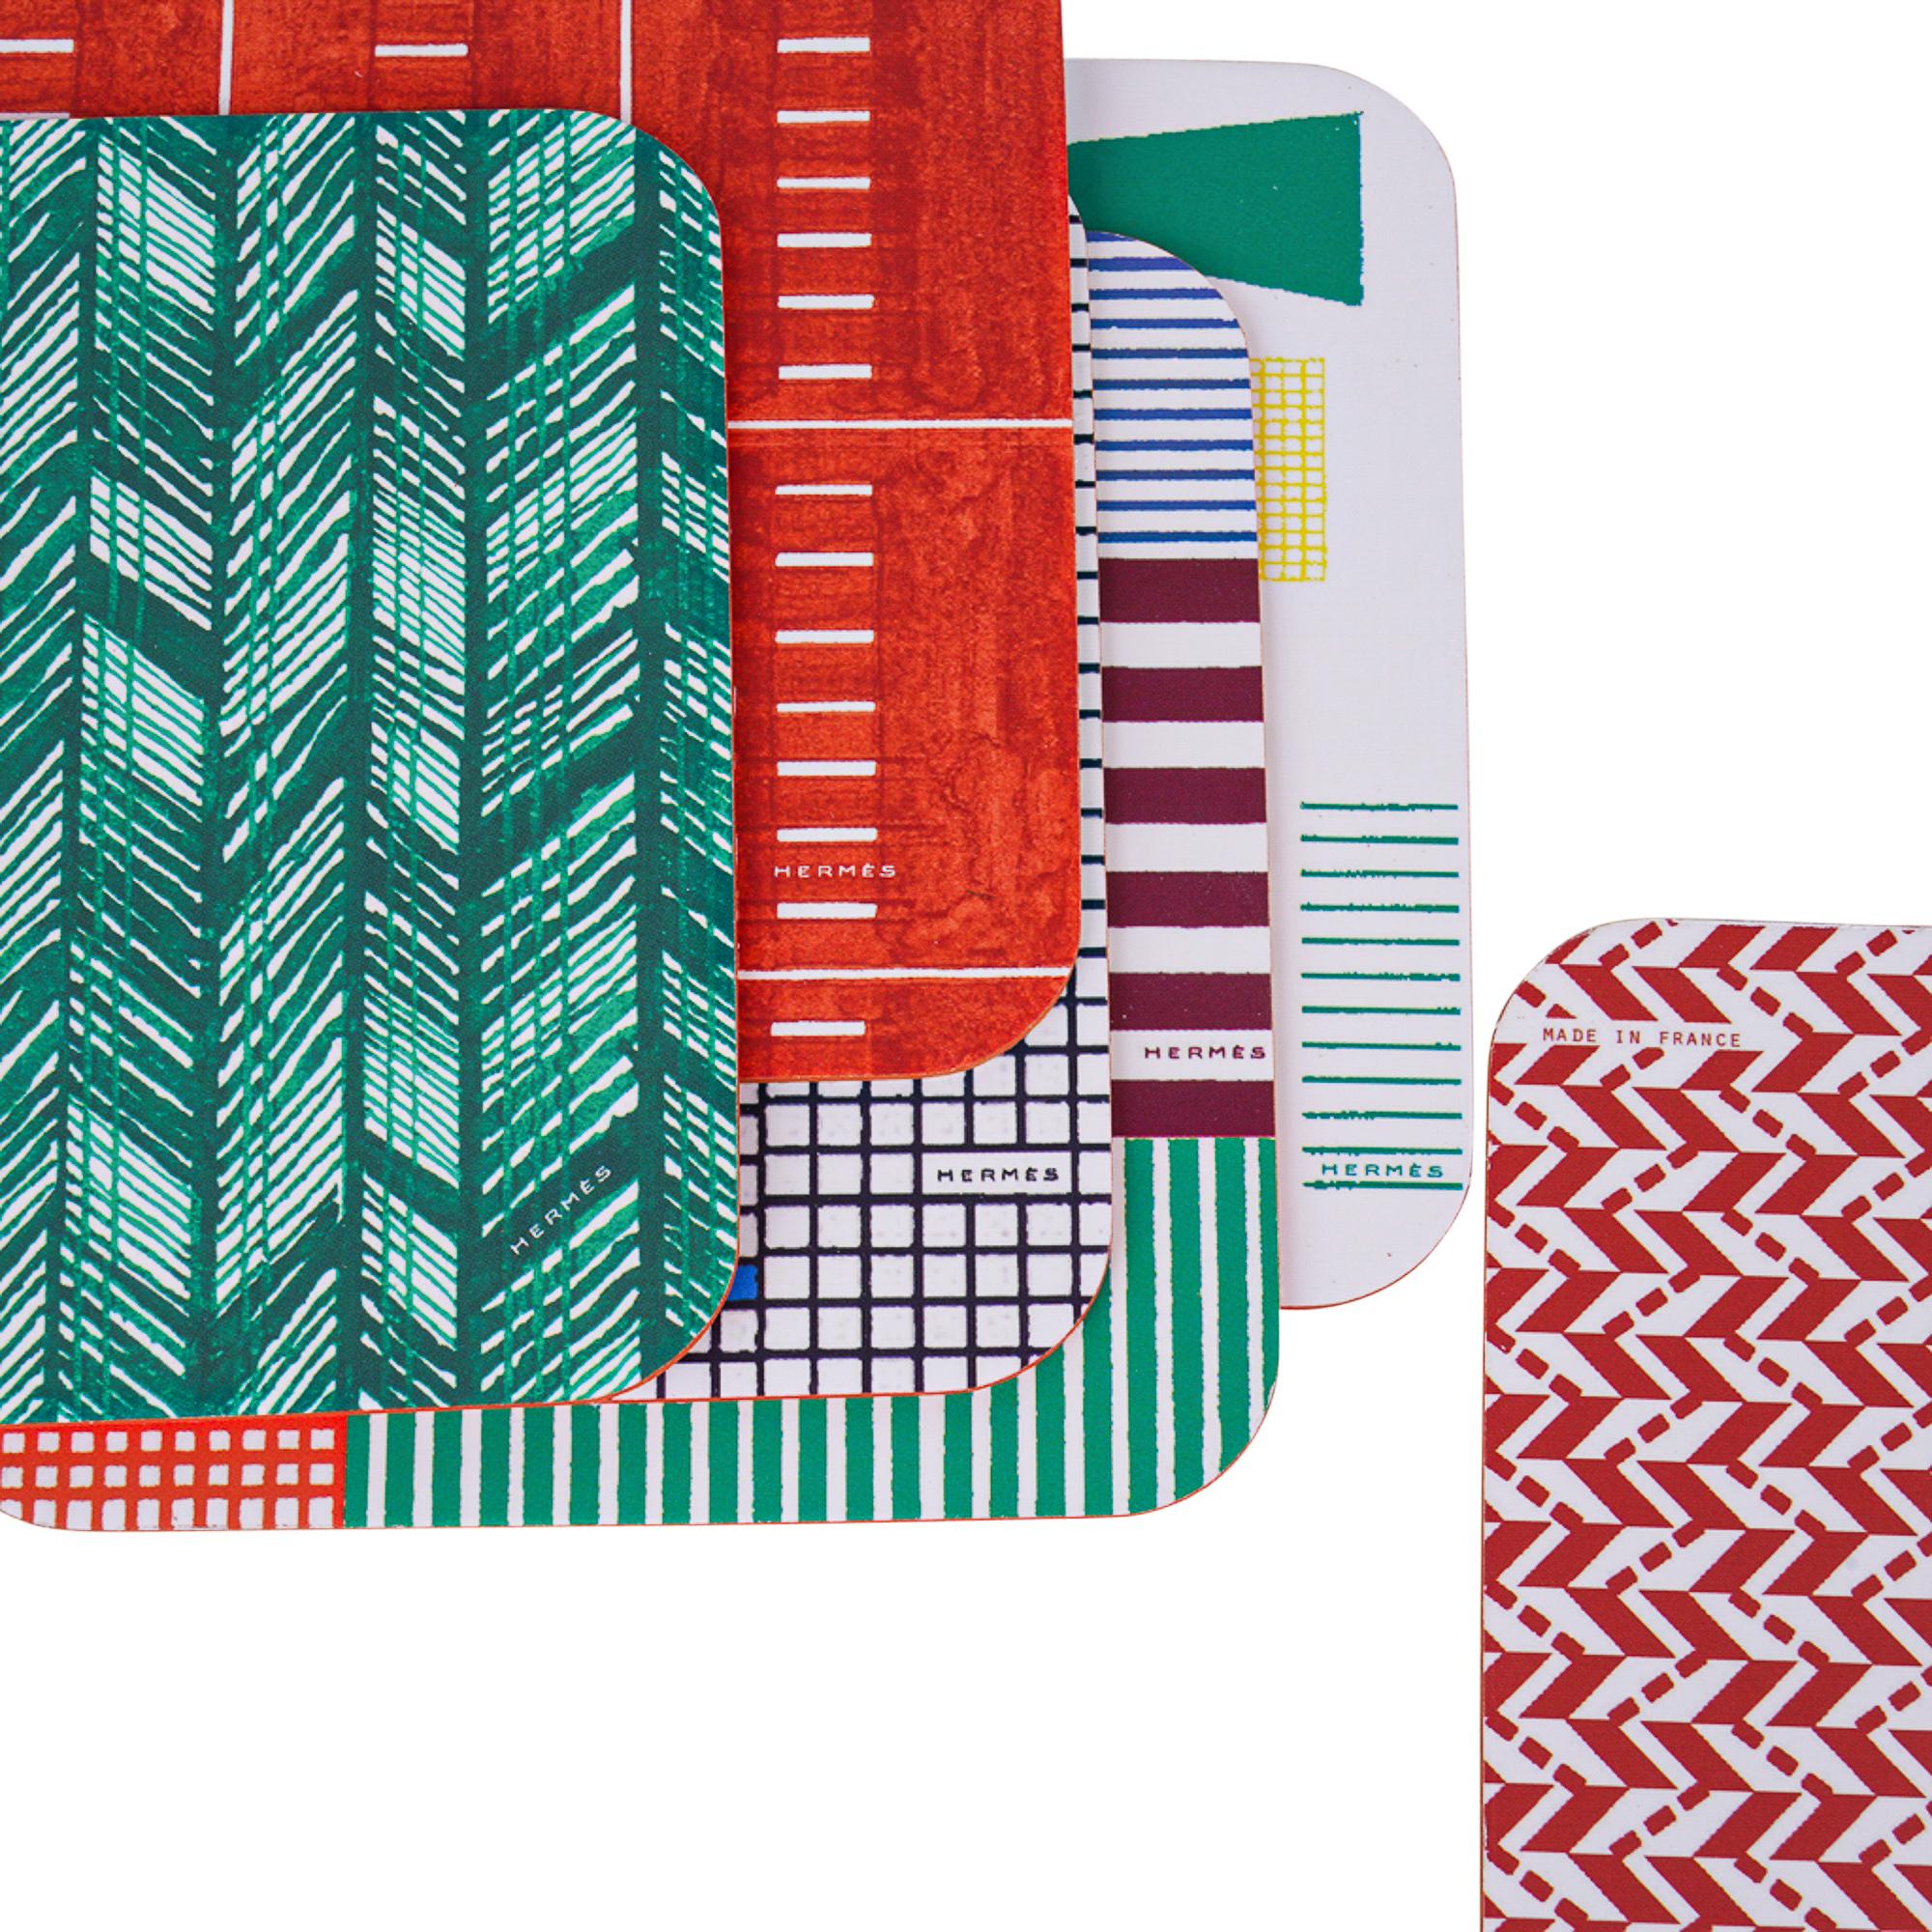 Mightychic offers charming Hermes set of 12 Toutenpapier coasters.
6 different abstract designs with a common design on reverse.
The coasters are square and come in different colorways.
1110 g/m2 paperboard.
Coasters come with signature Hermes